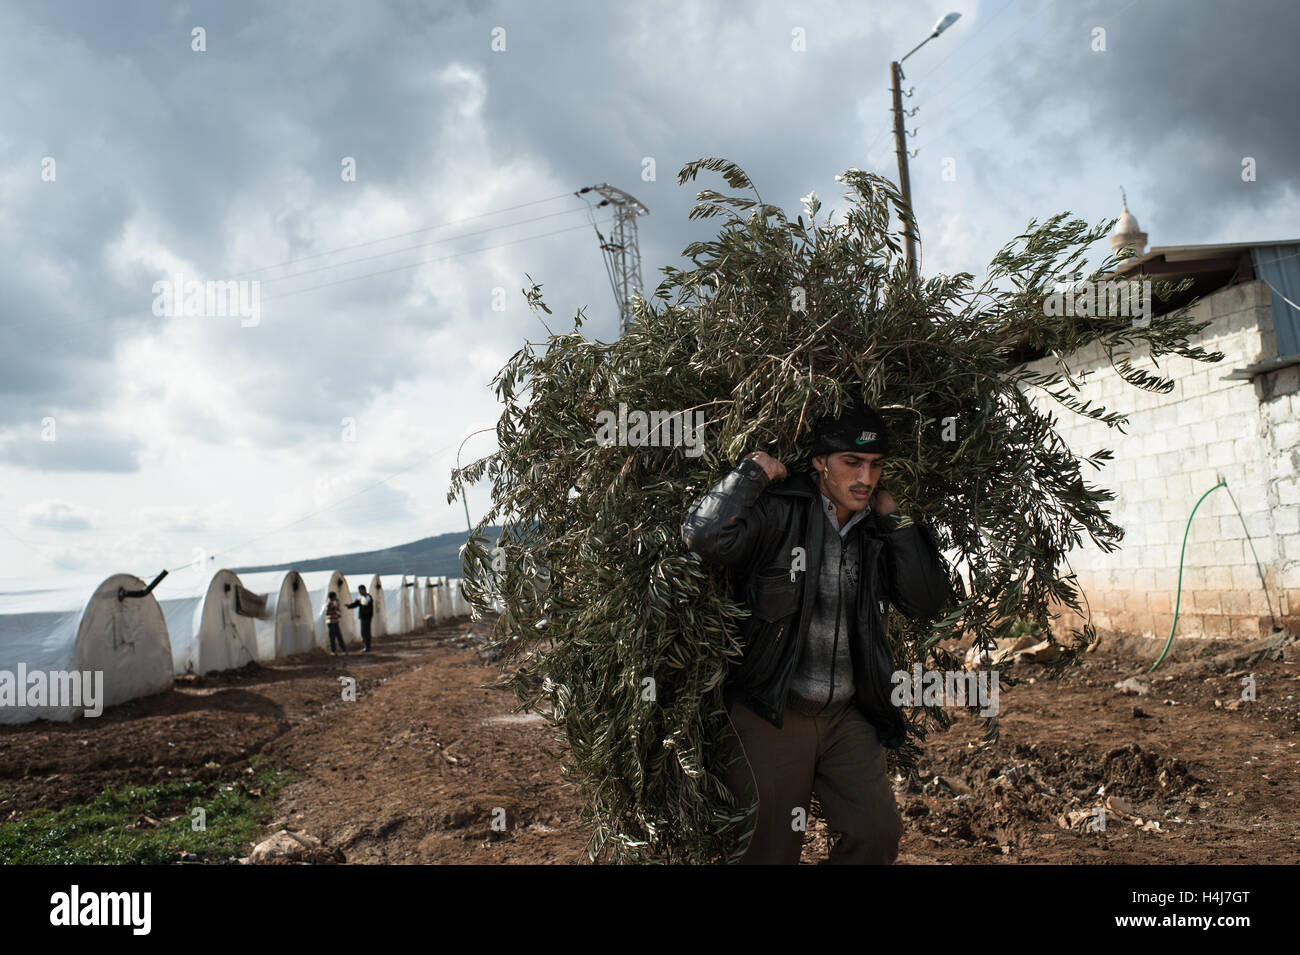 Azaz refugee camp daily life -  19/02/2013  -  Syria / Aleppo / Azaz  -  A refugee of the Azaz camp carries olive tree branches to make fire in his tent.The Azaz refugee camp, north of Syria, welcomes families trying to escape fightings between the Syrian governmental army and the Free Syrian Army.  According to NGO 'Medical Relief for Syria', some 10.000 people live in the camp in worrying sanitary conditions.                                        -  Edouard Elias / le Pictorium Stock Photo